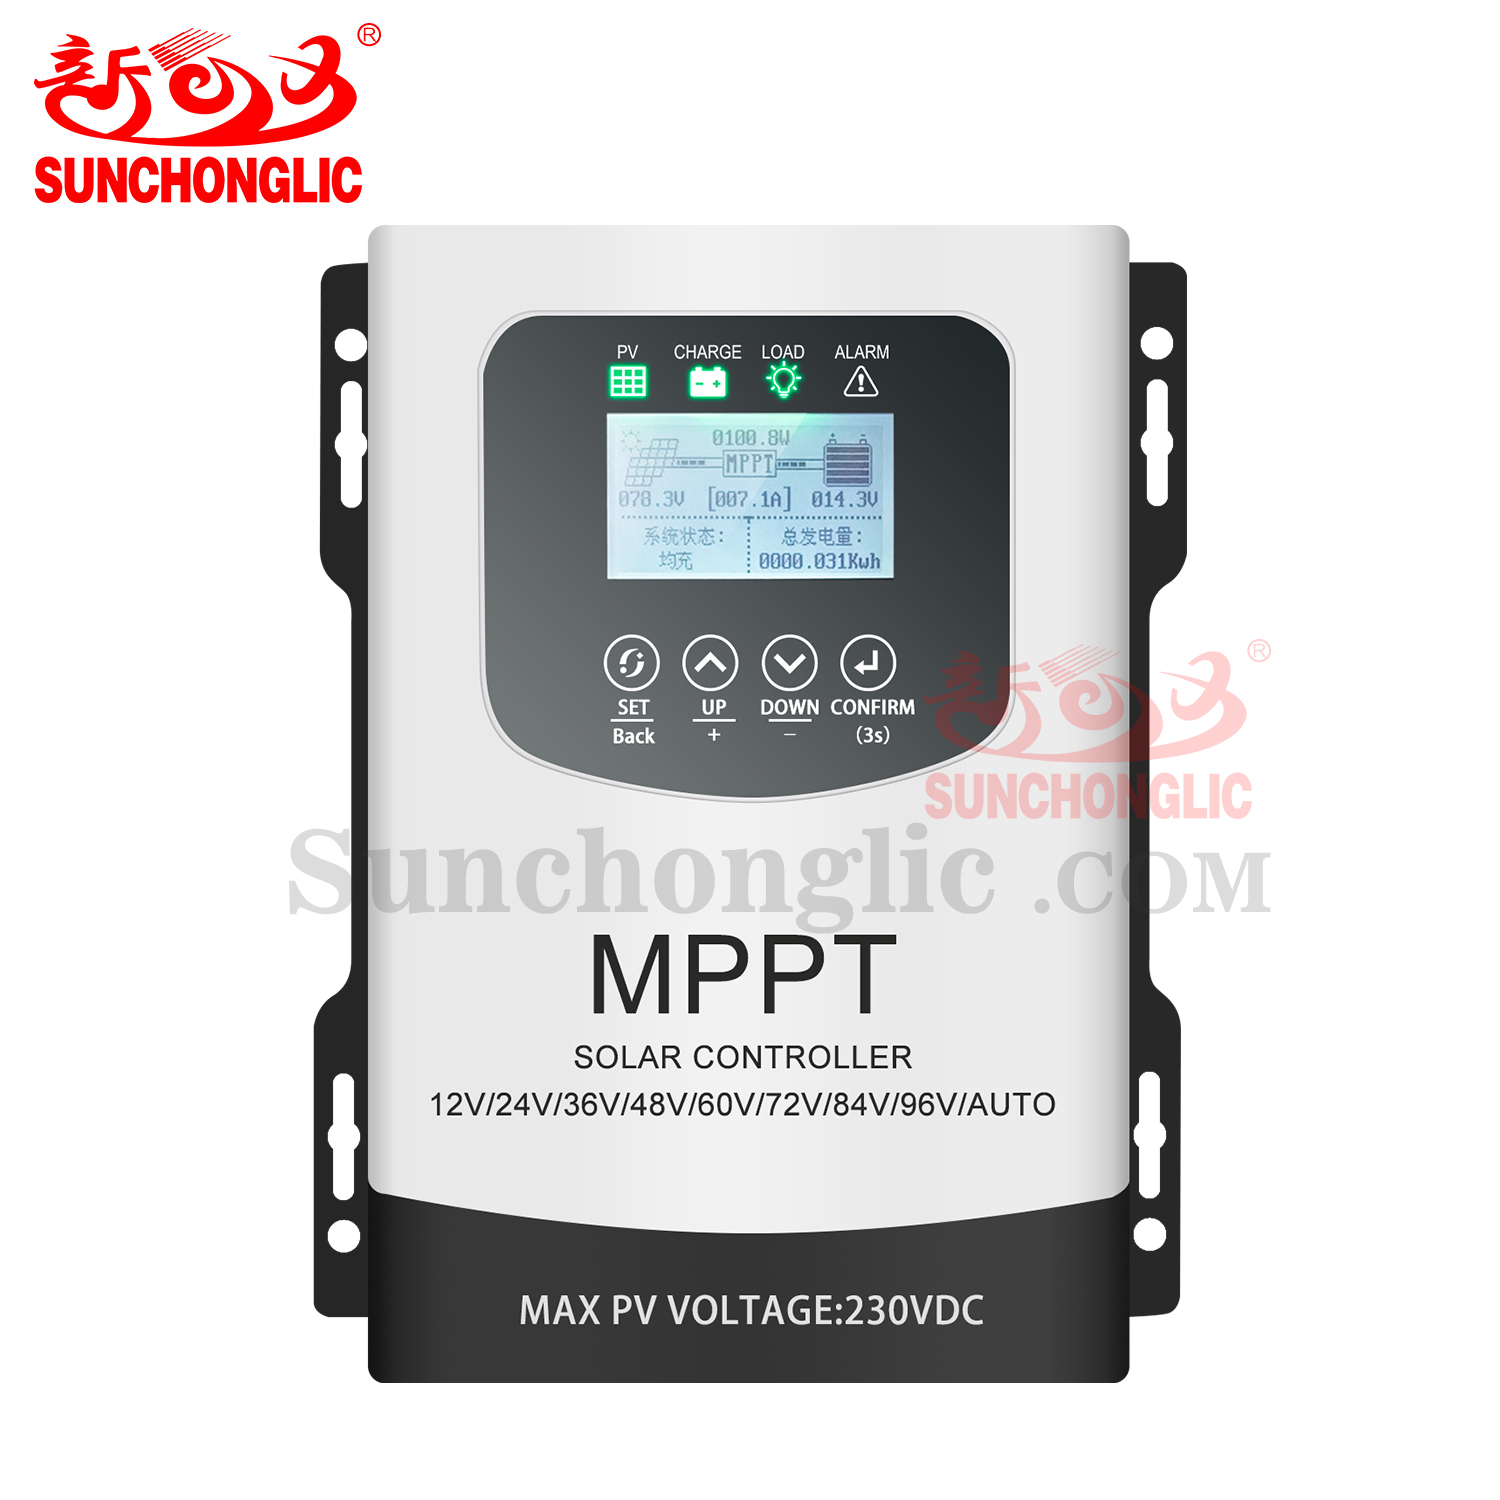 Solar Charge Controller - MPPT Series